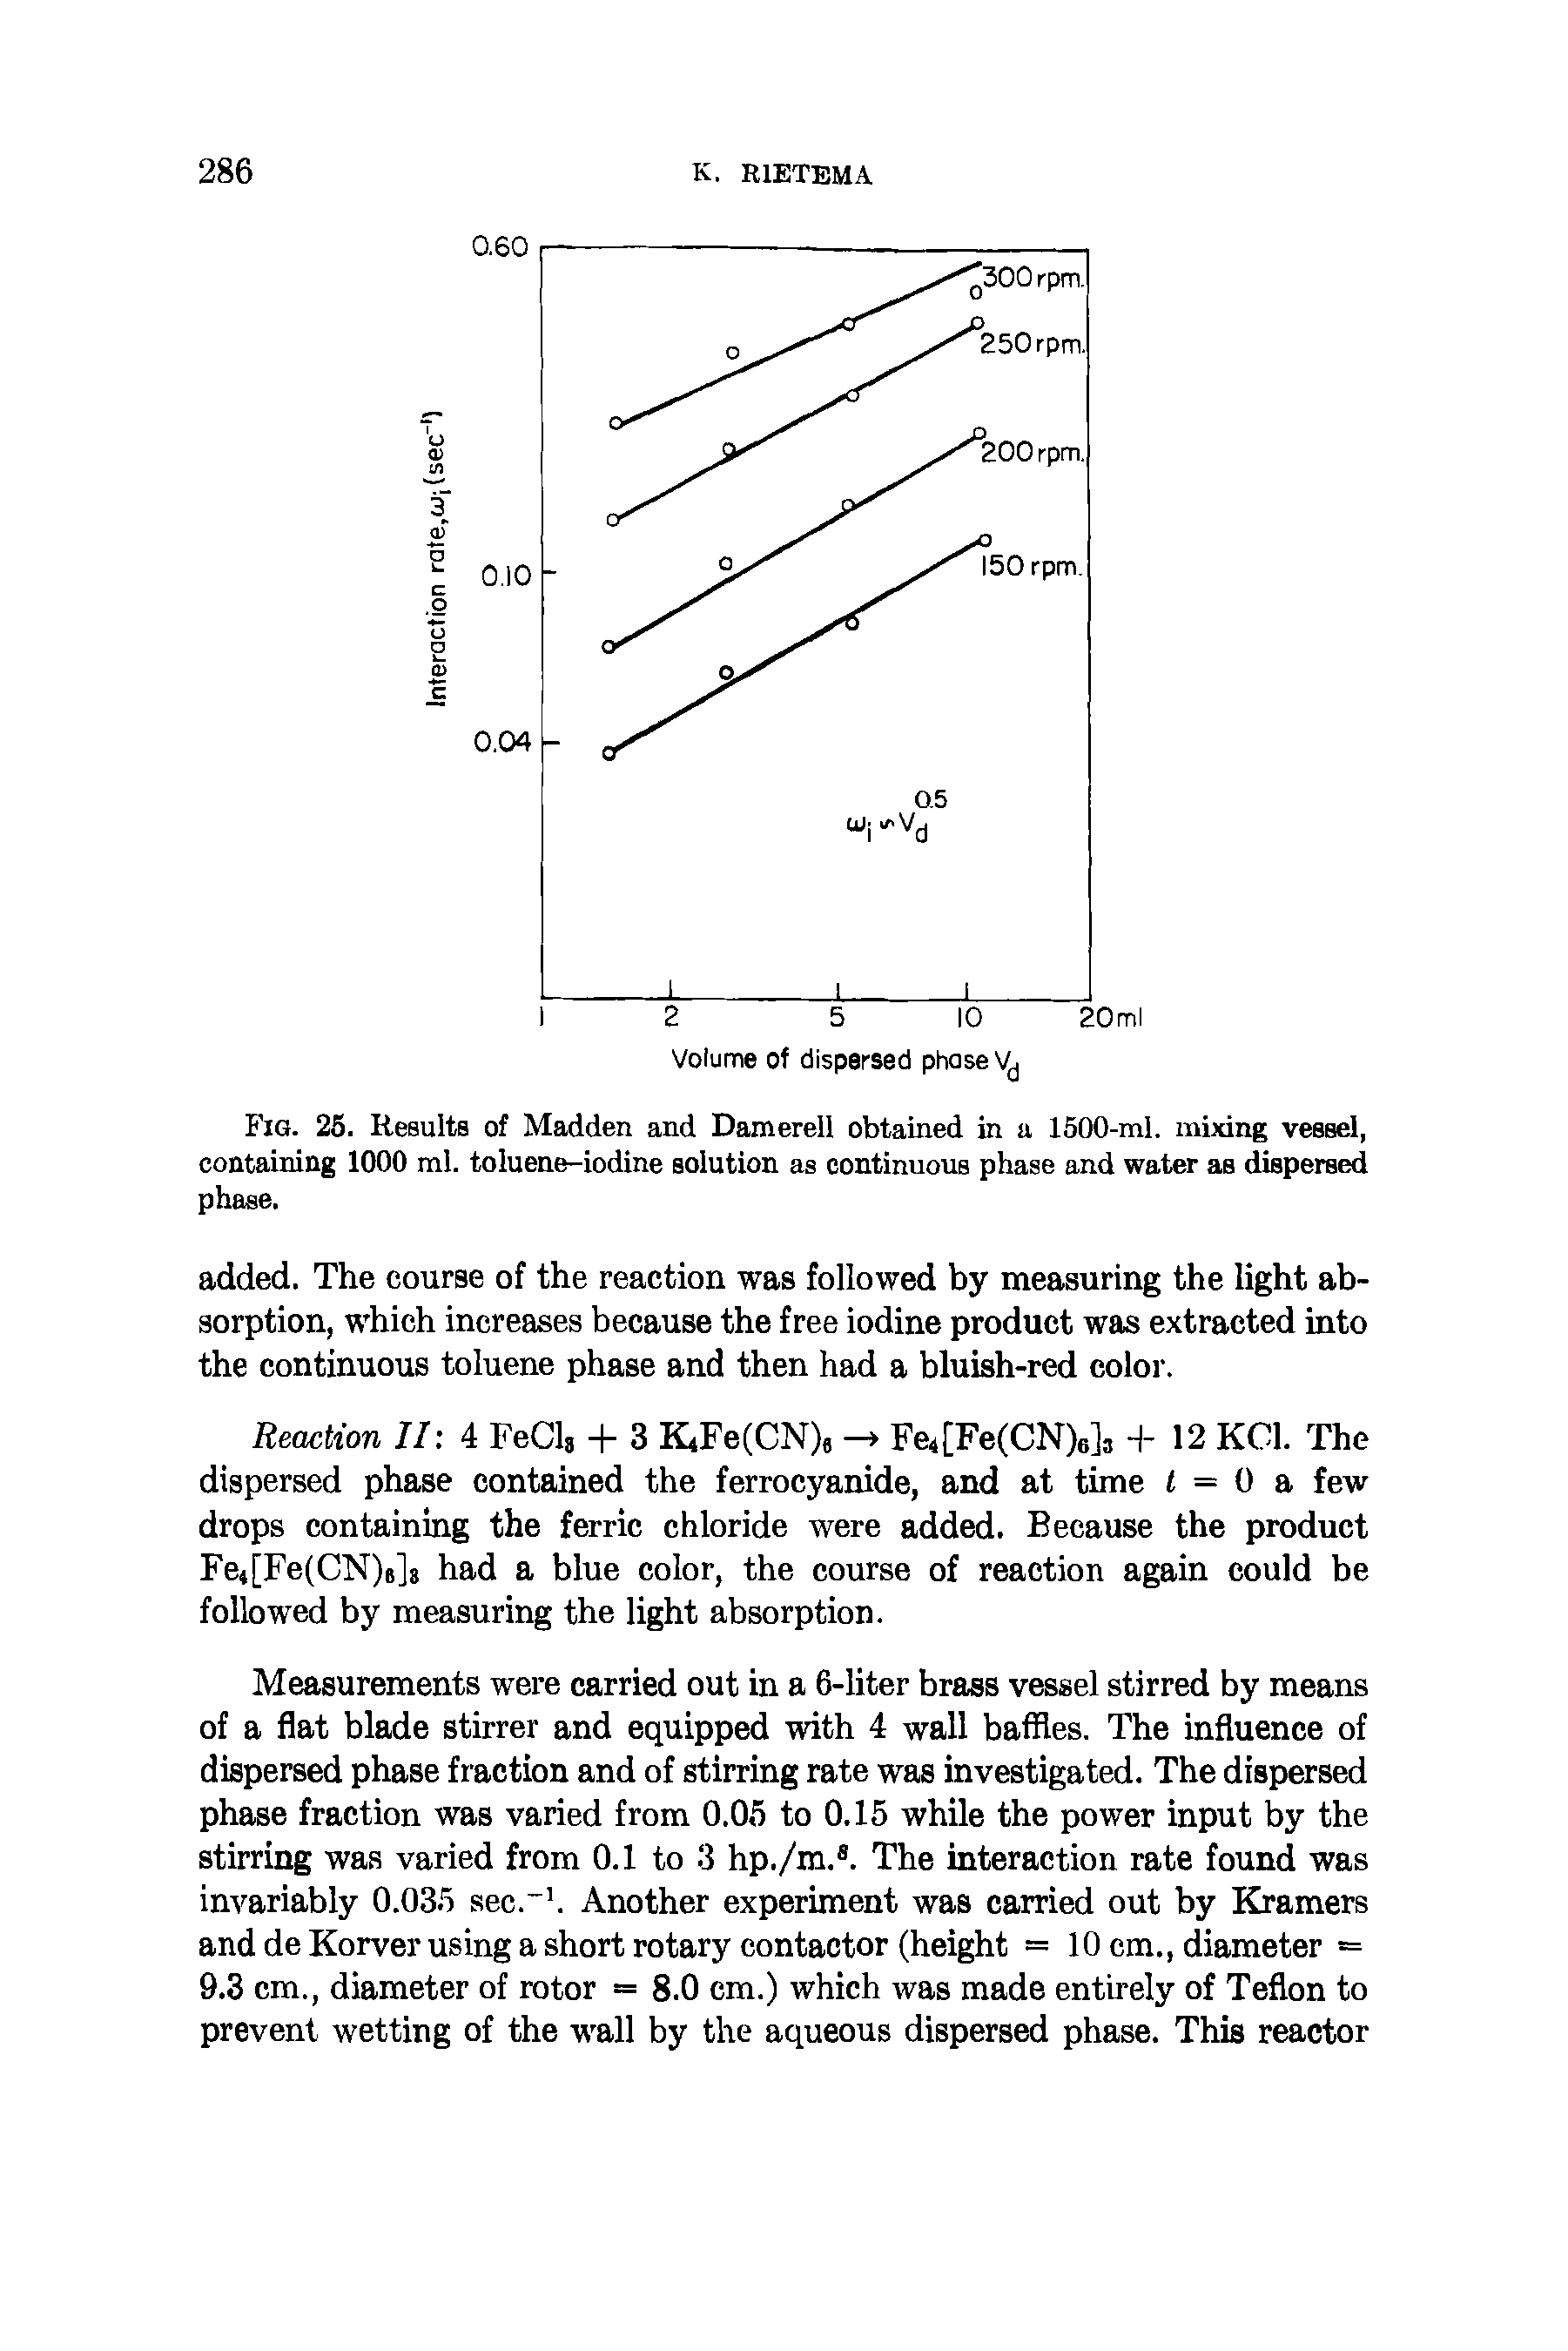 Fig. 25. Results of Madden and Damerell obtained in a 1500-ml. mixing vessel, containing 1000 ml. toluene-iodine solution as continuous phase and water as dispersed phase.